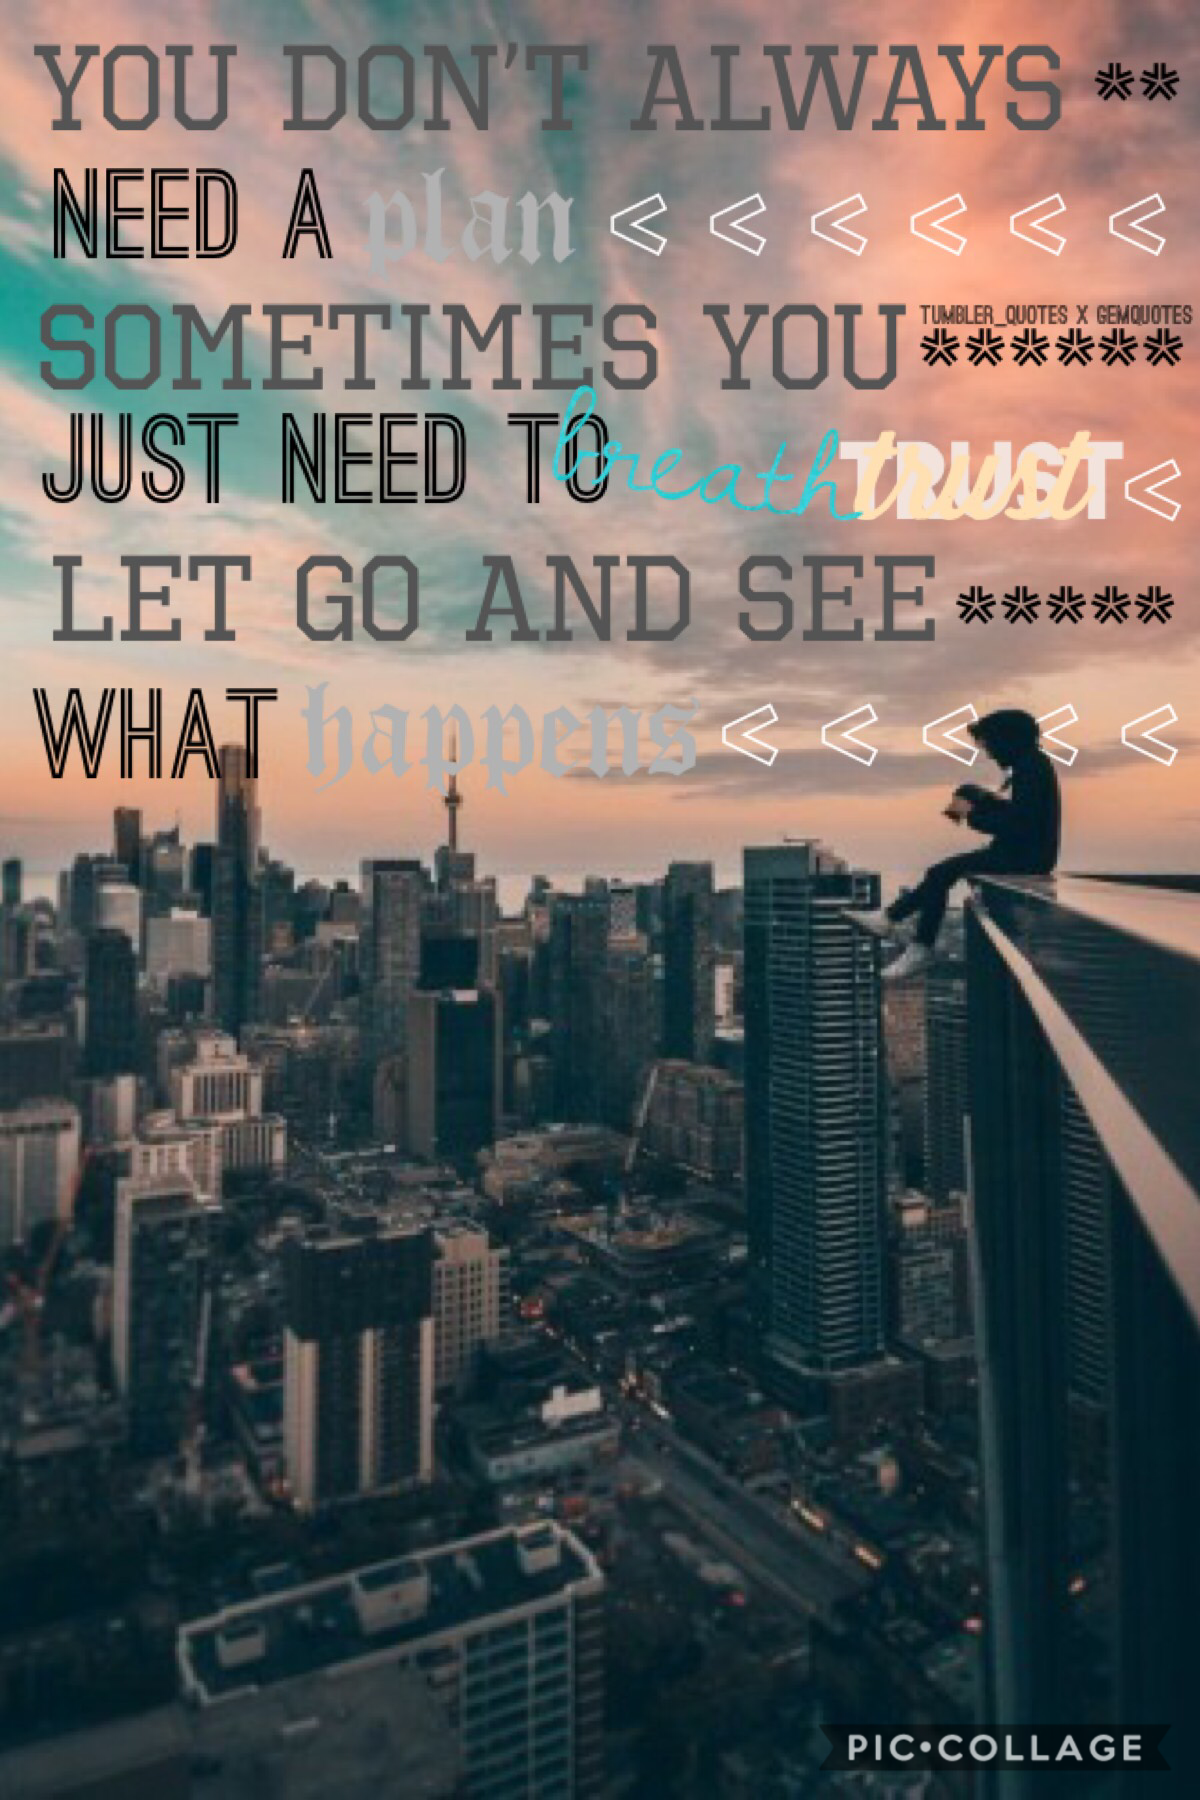 🧡click💜
tumbler_quotes x GemQuotes 
(im sorry i made i terribly u did so good on urs oml i did so bad) 